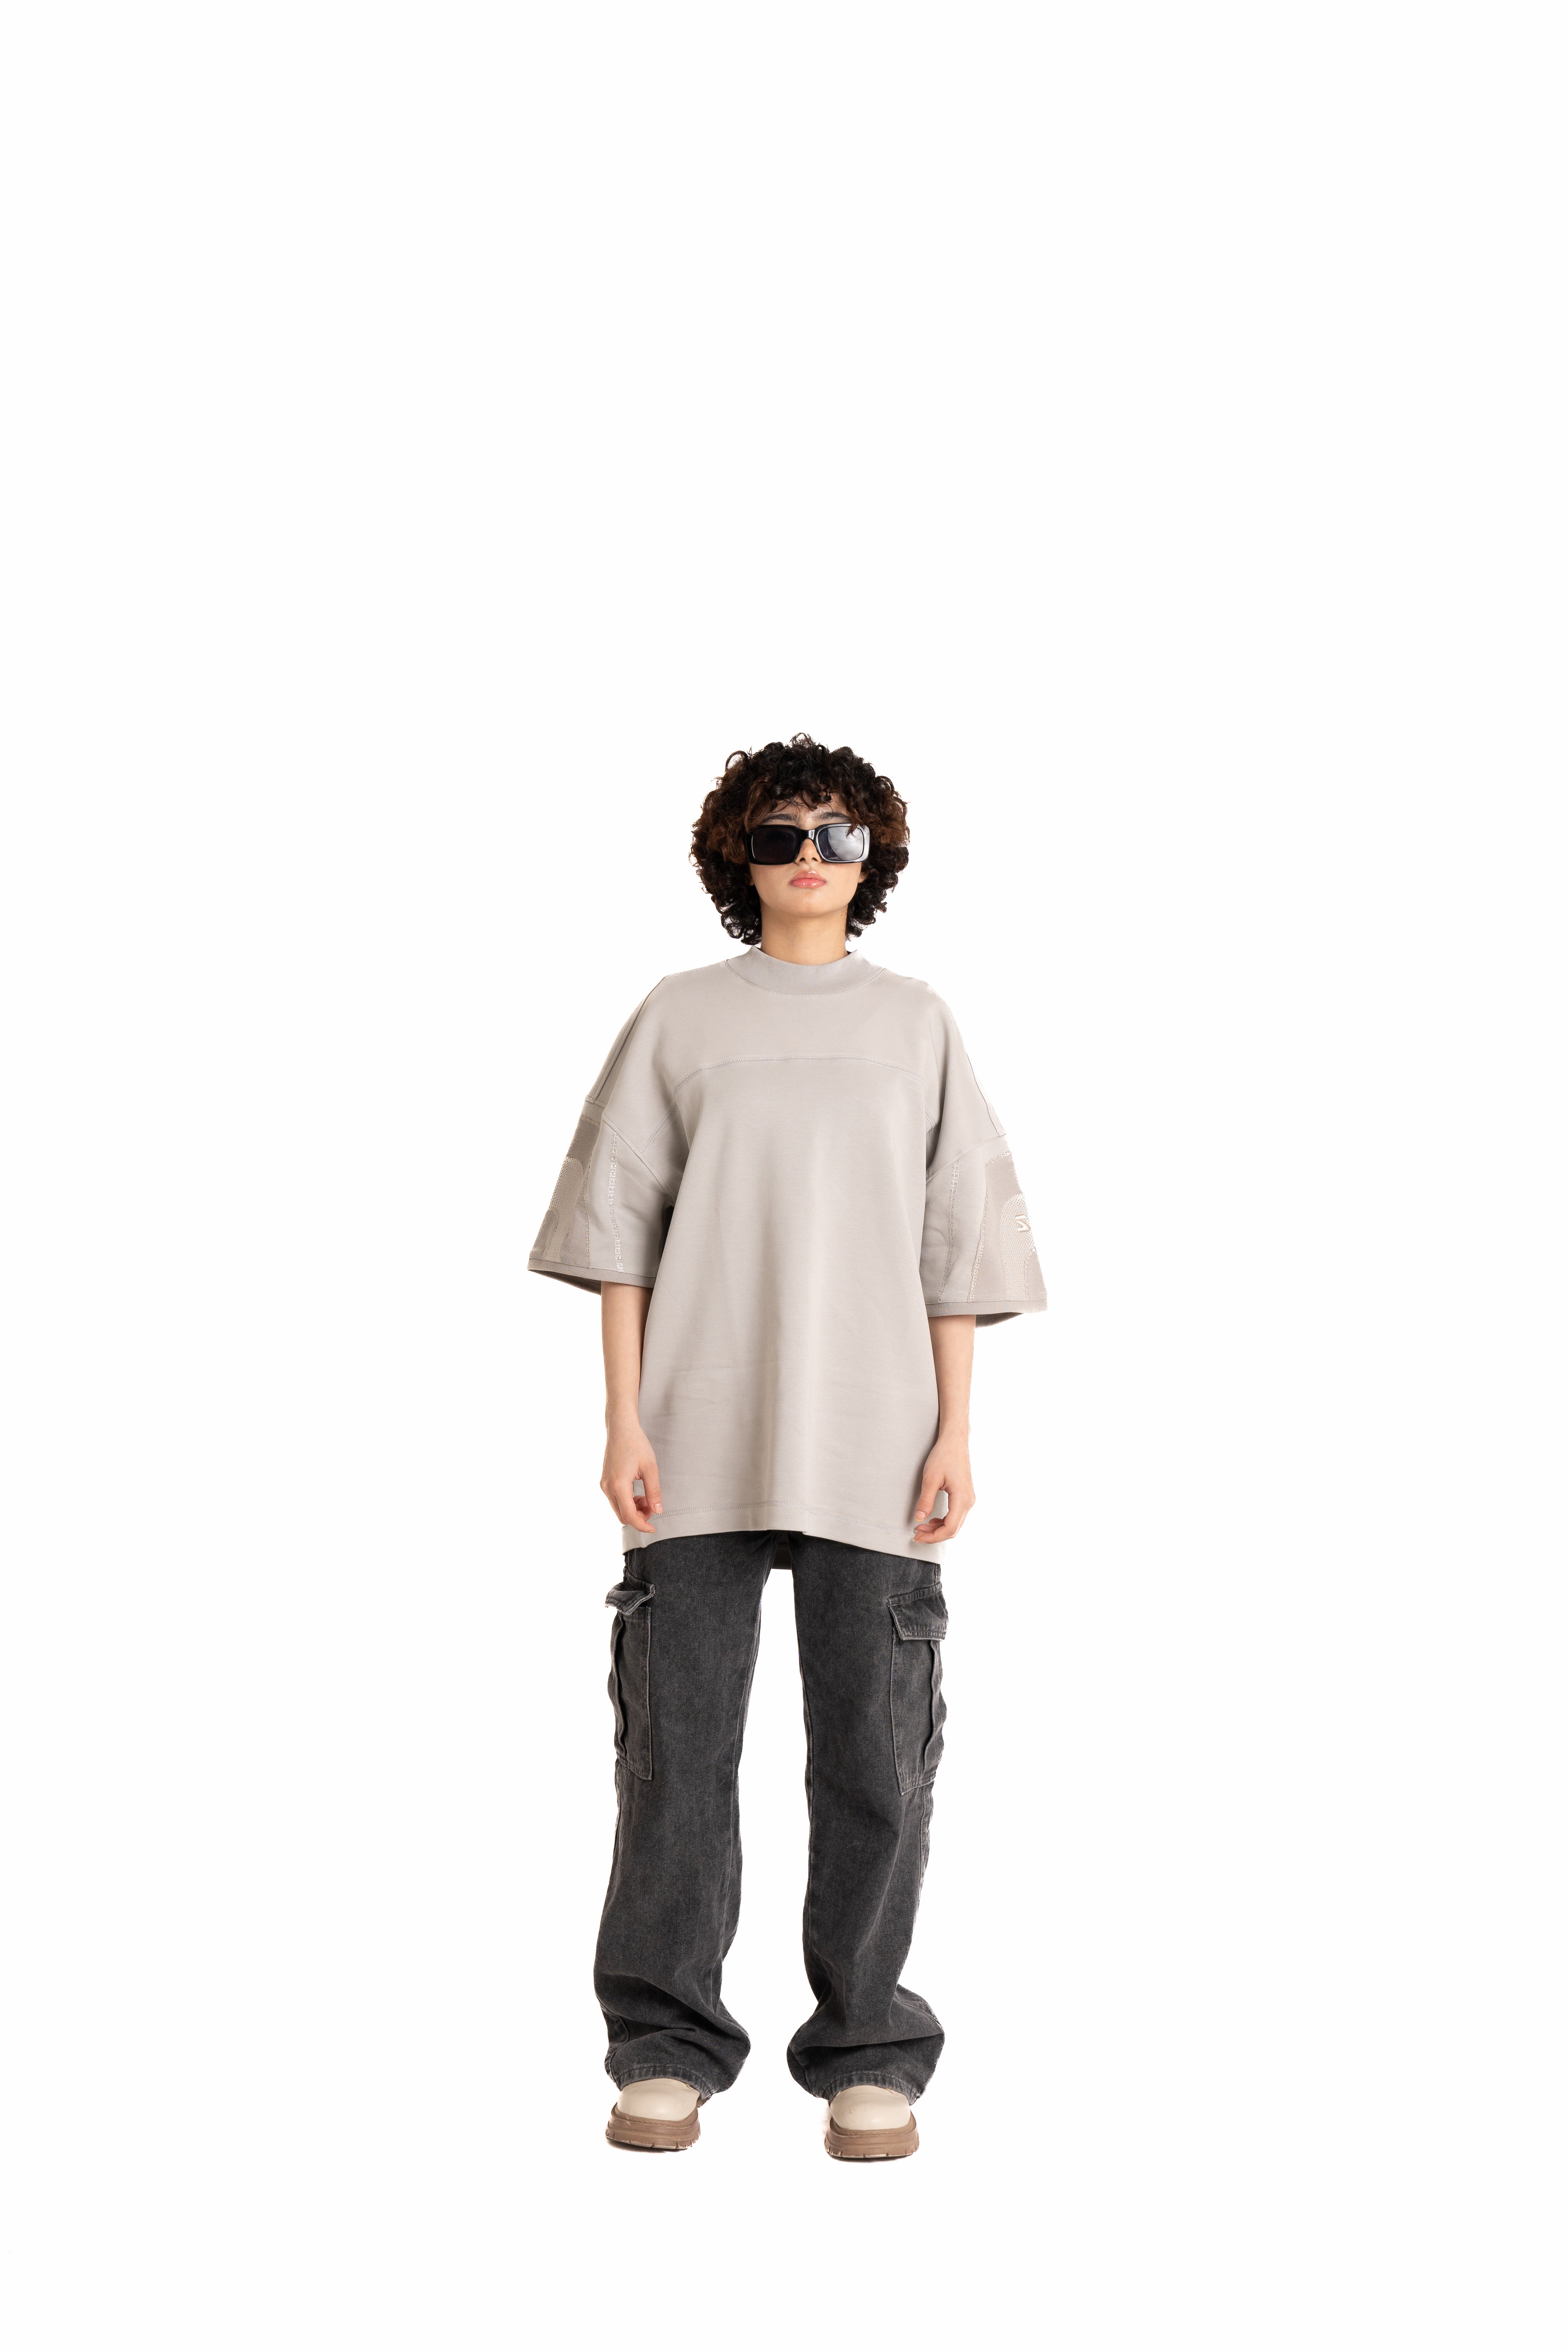 Beige Oversize T-shirt By S32